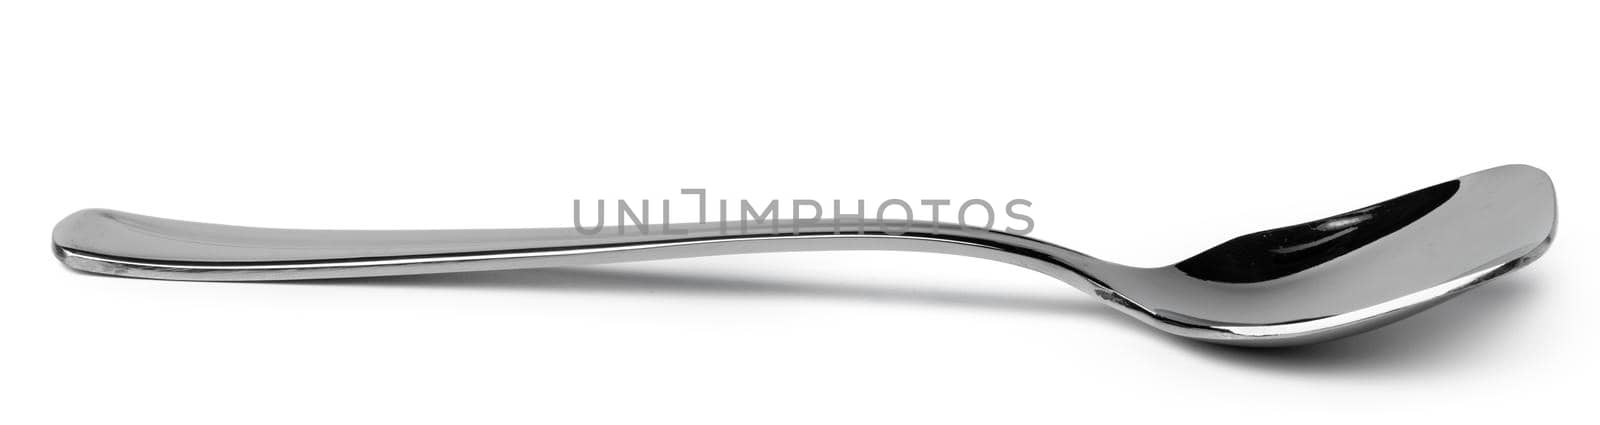 Stainless steel spoon isolated on white background close up